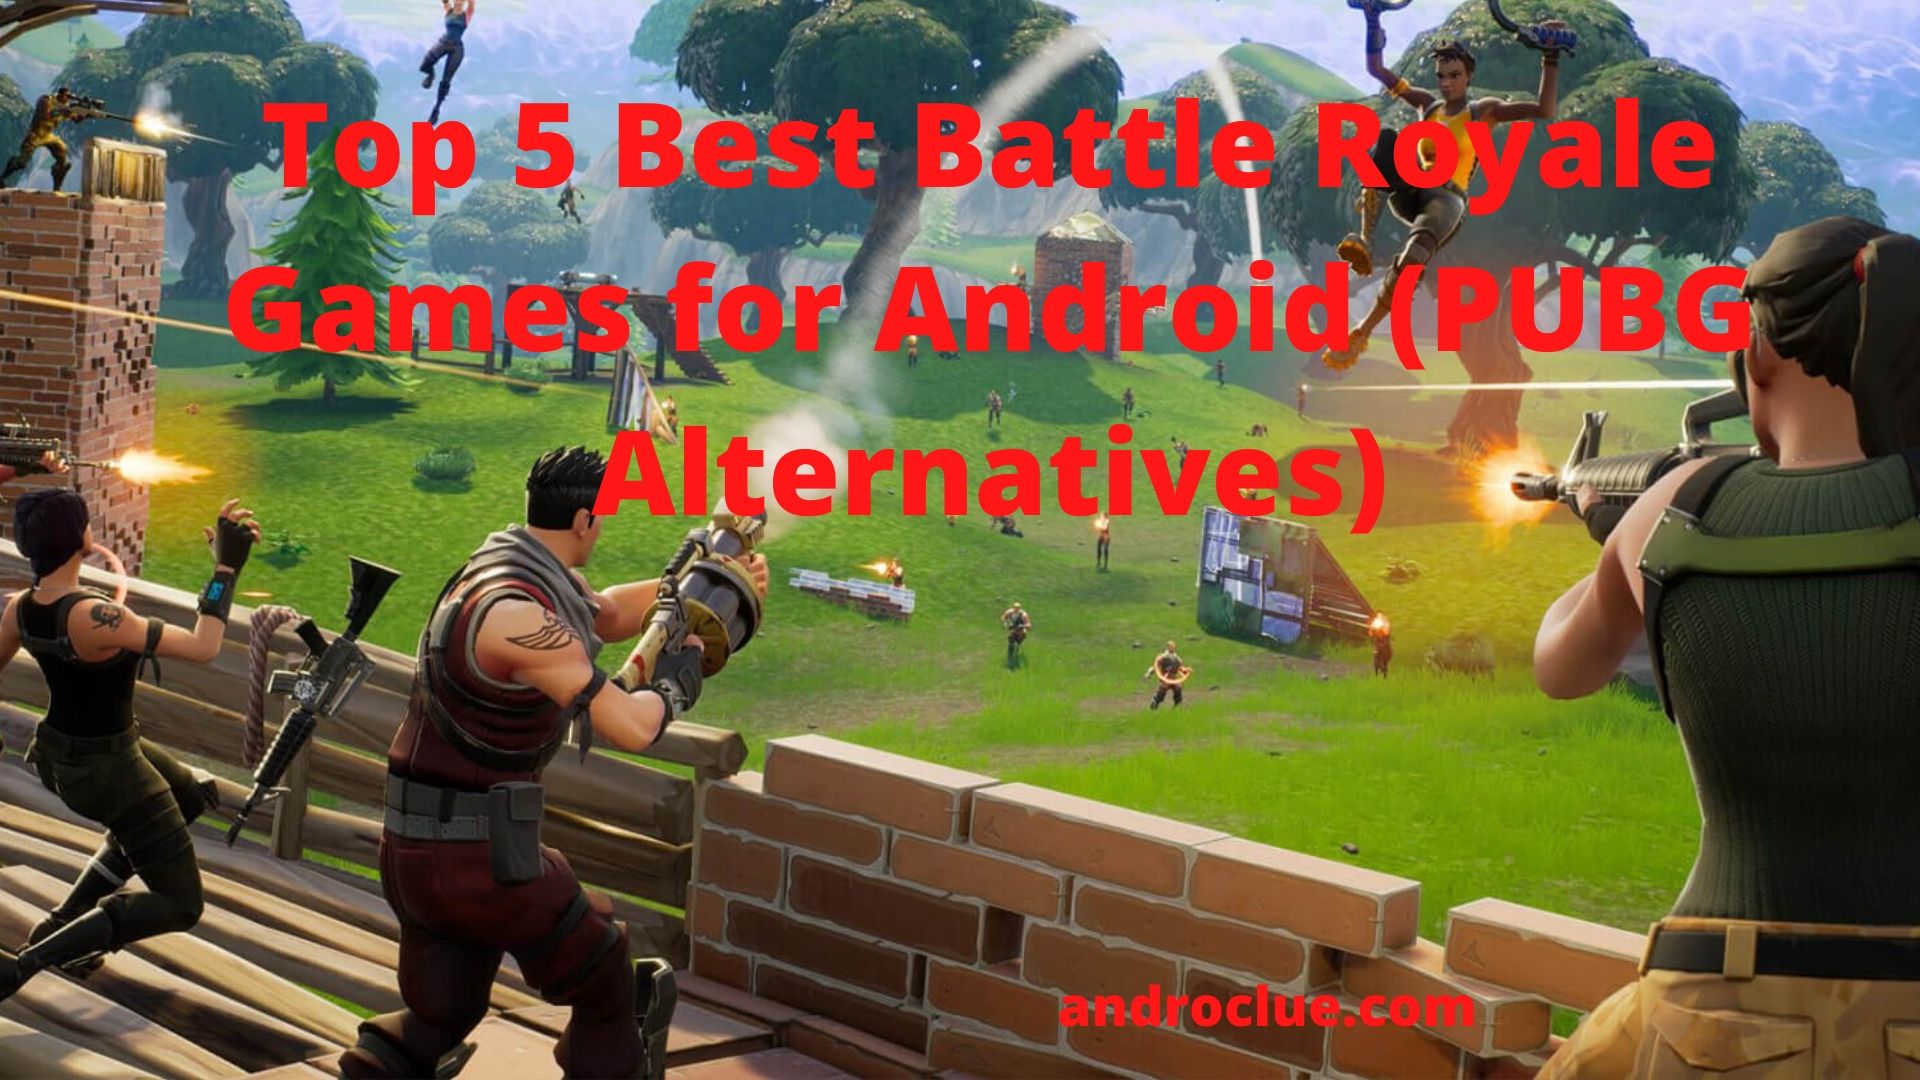 Top 5 Best Battle Royale Games for Android Devices (PUBG Alternatives)